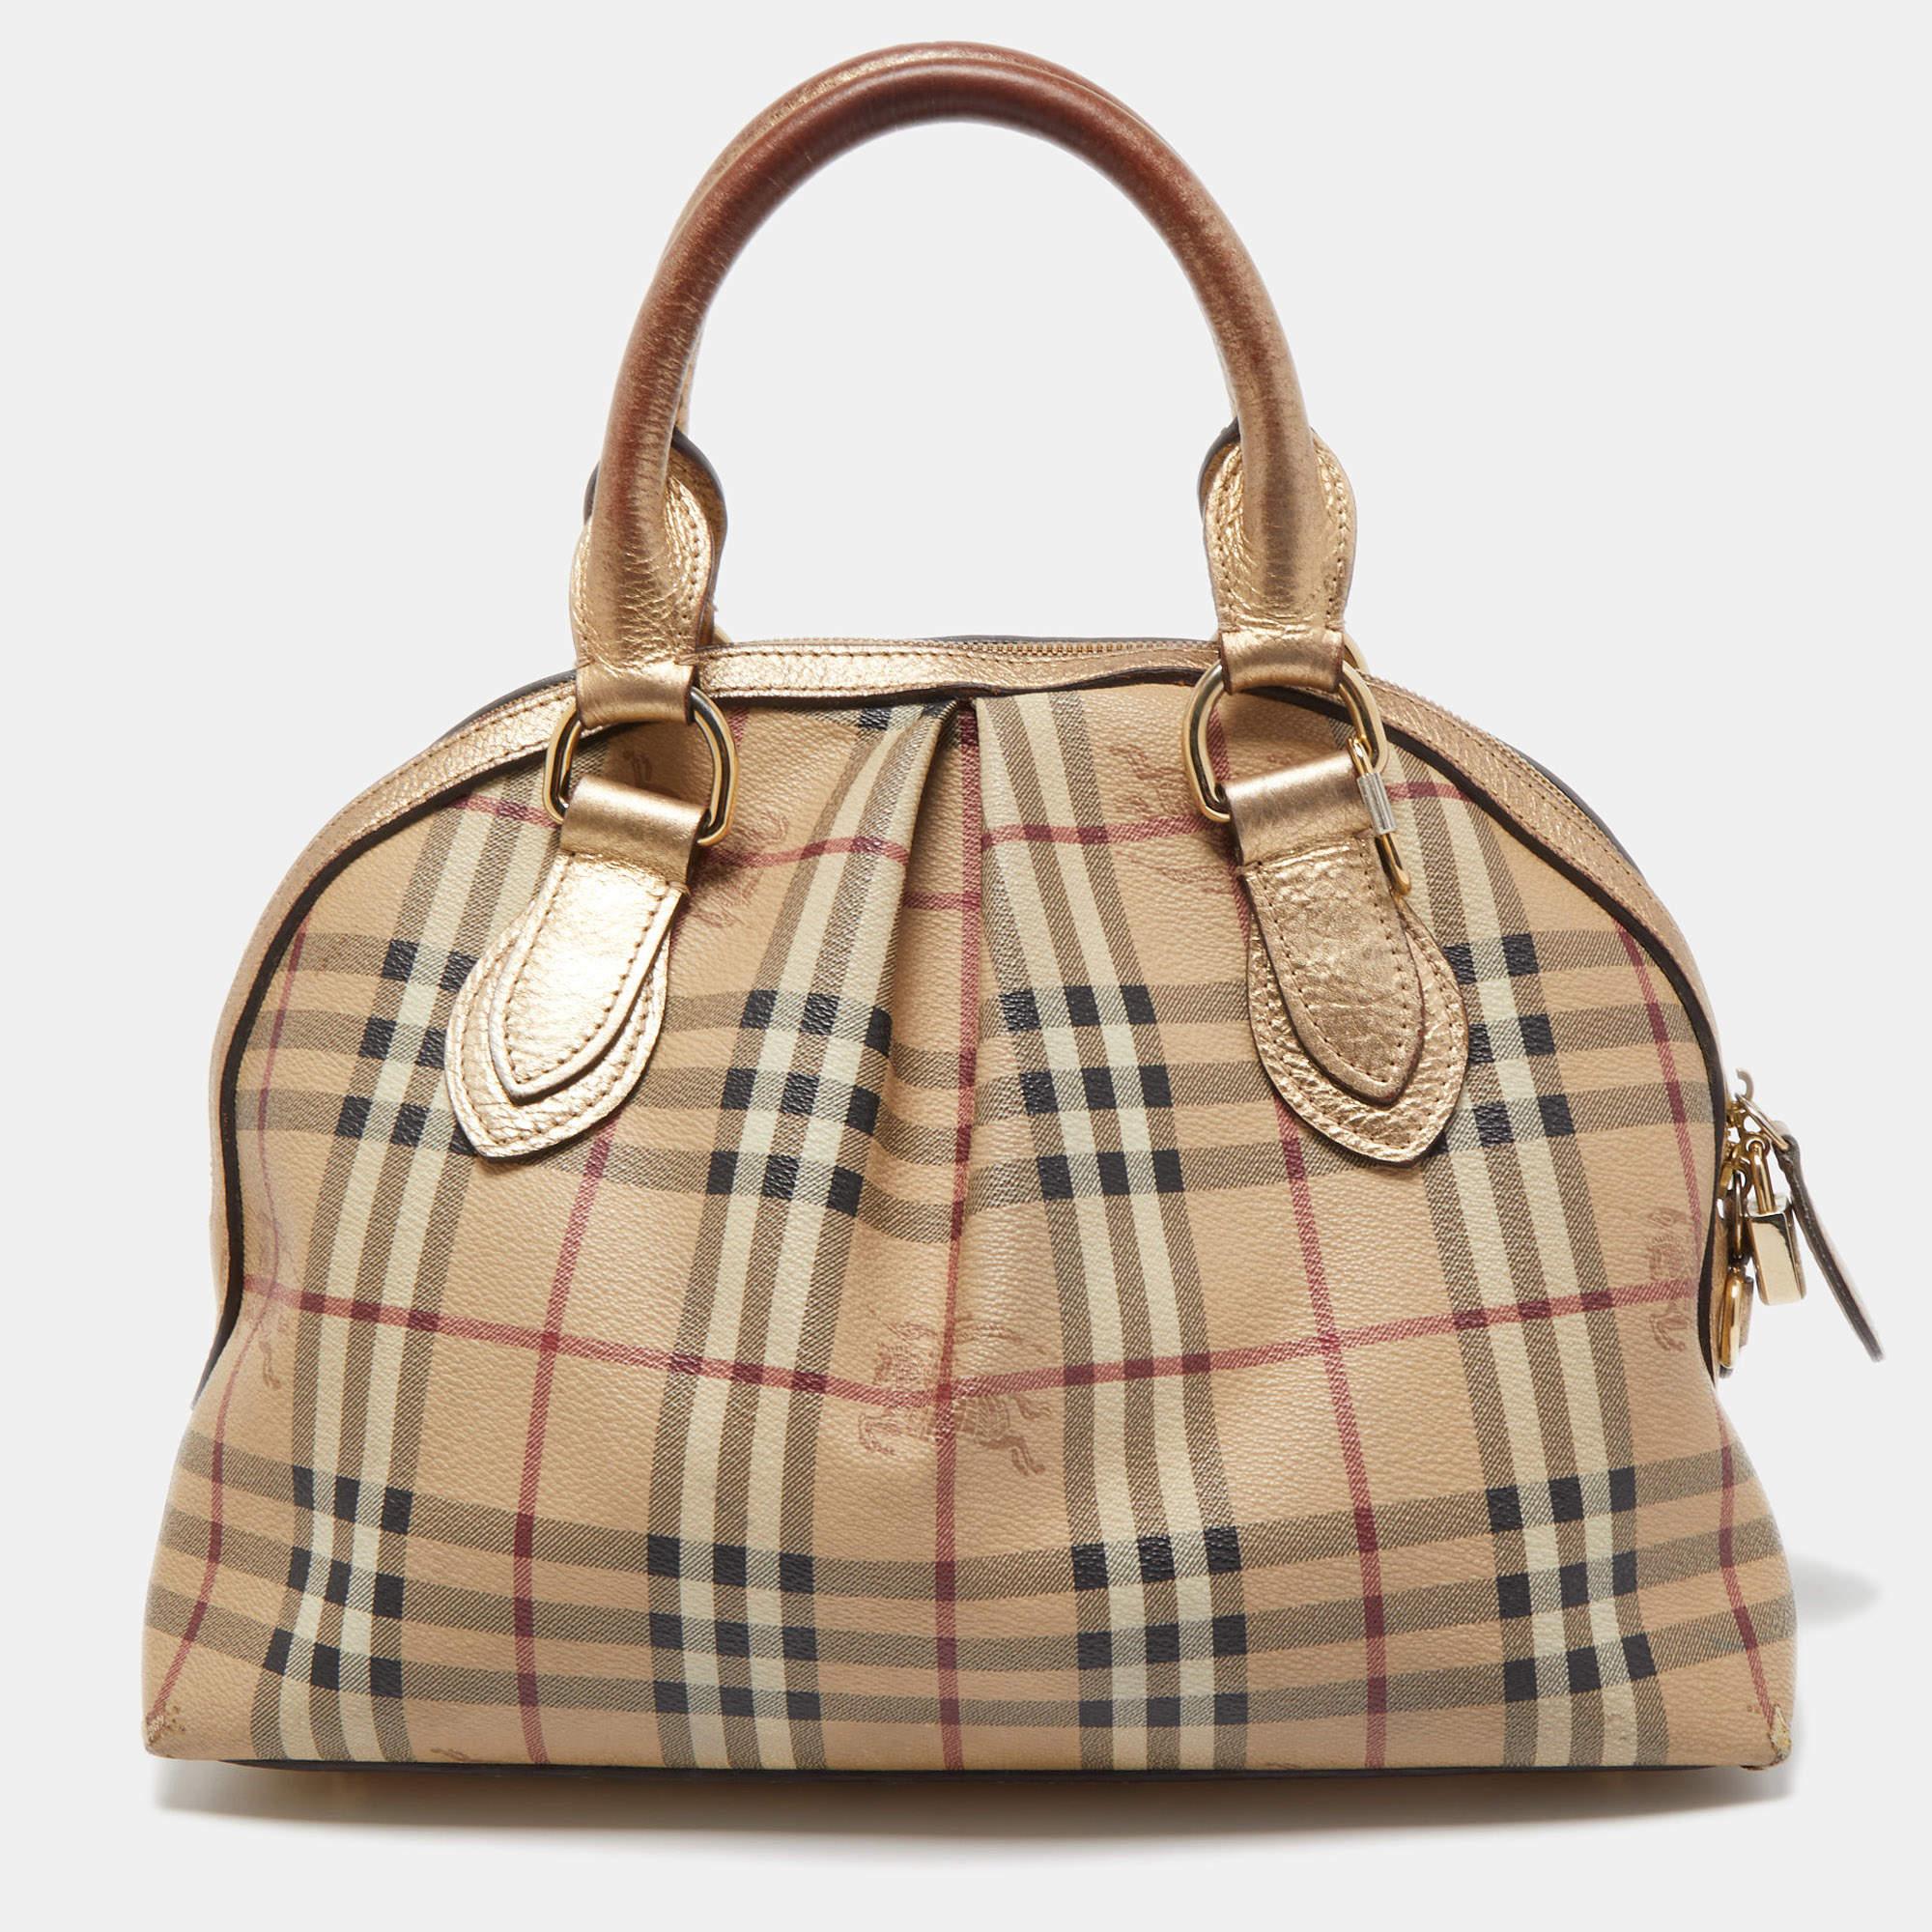 Burberry's Thornley satchel is for everyday use. It has been crafted from signature Haymarket Check PVC, leather trims and gold-tone hardware. It comes with dual-rolled handles and the zip-top closure opens to a well-sized canvas interior.

